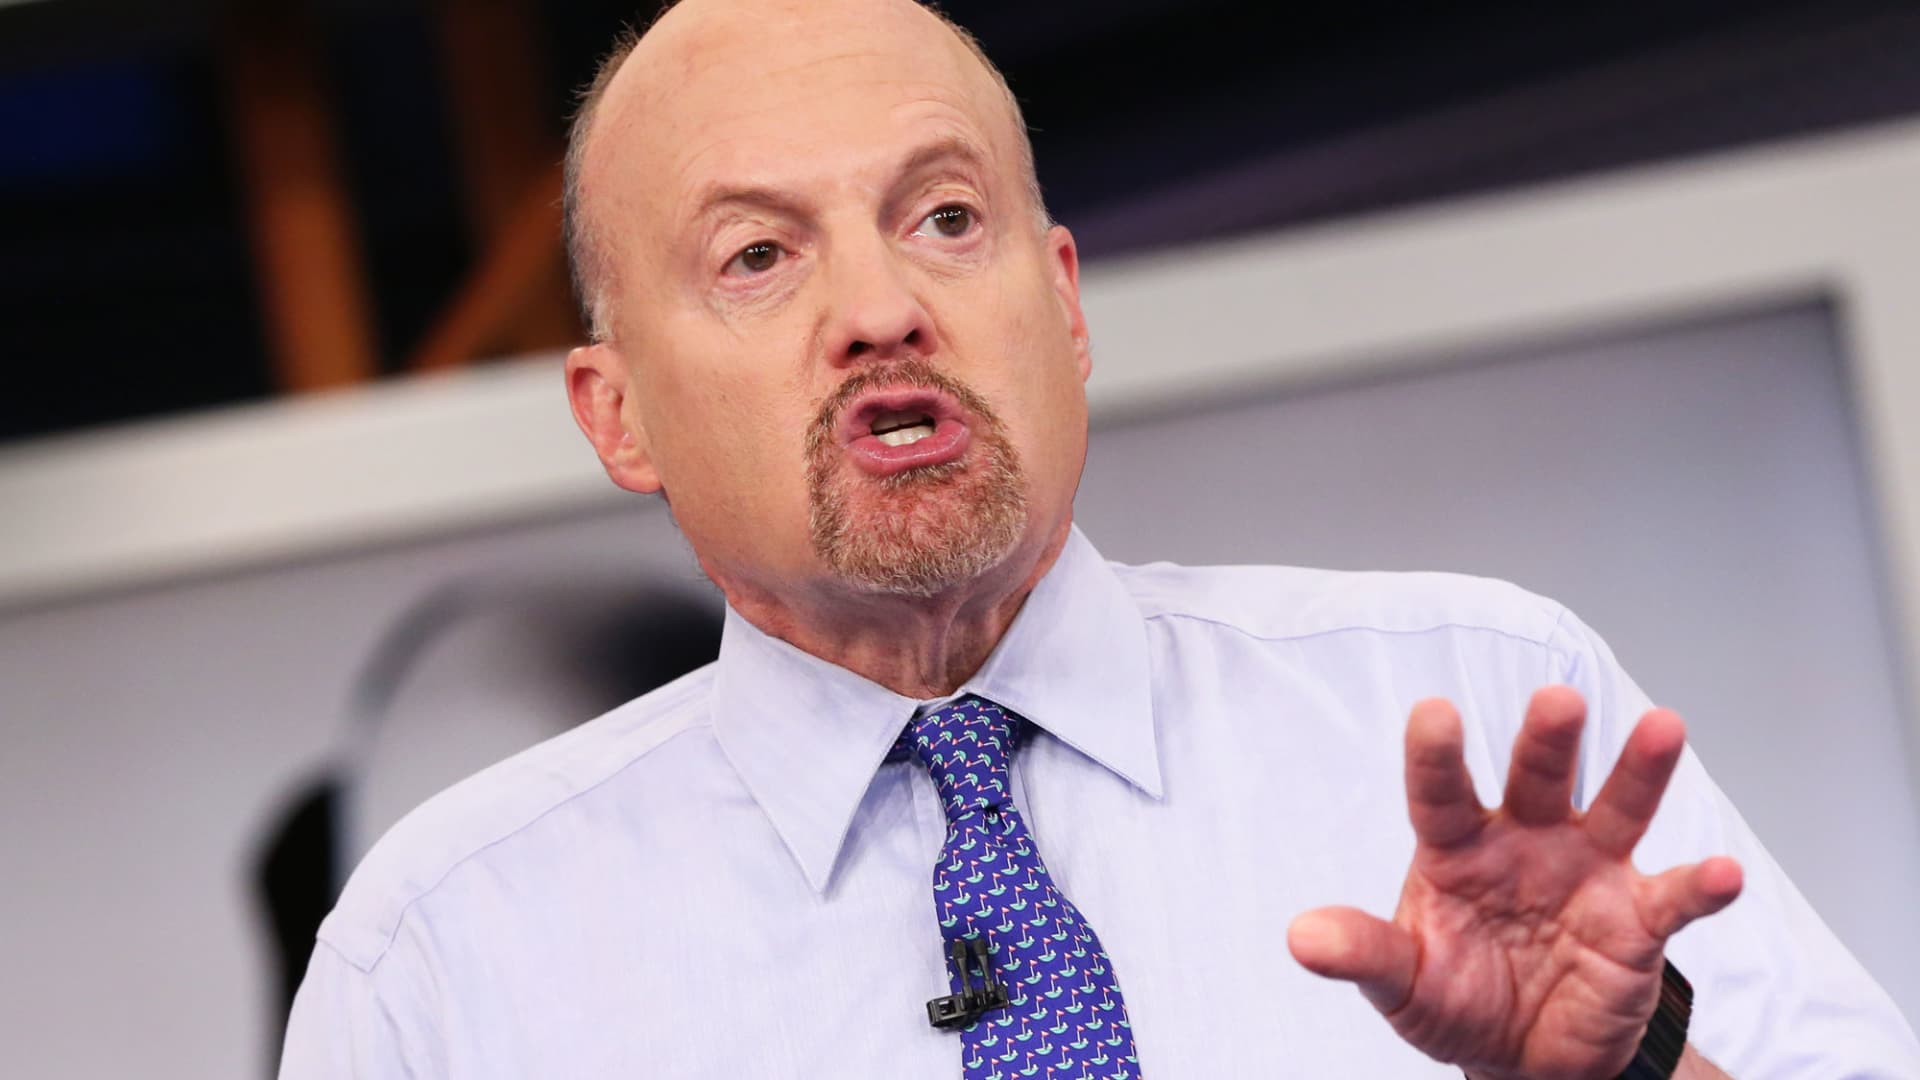 Jim Cramer says his group of FANG tech companies have lost their magic - CNBC